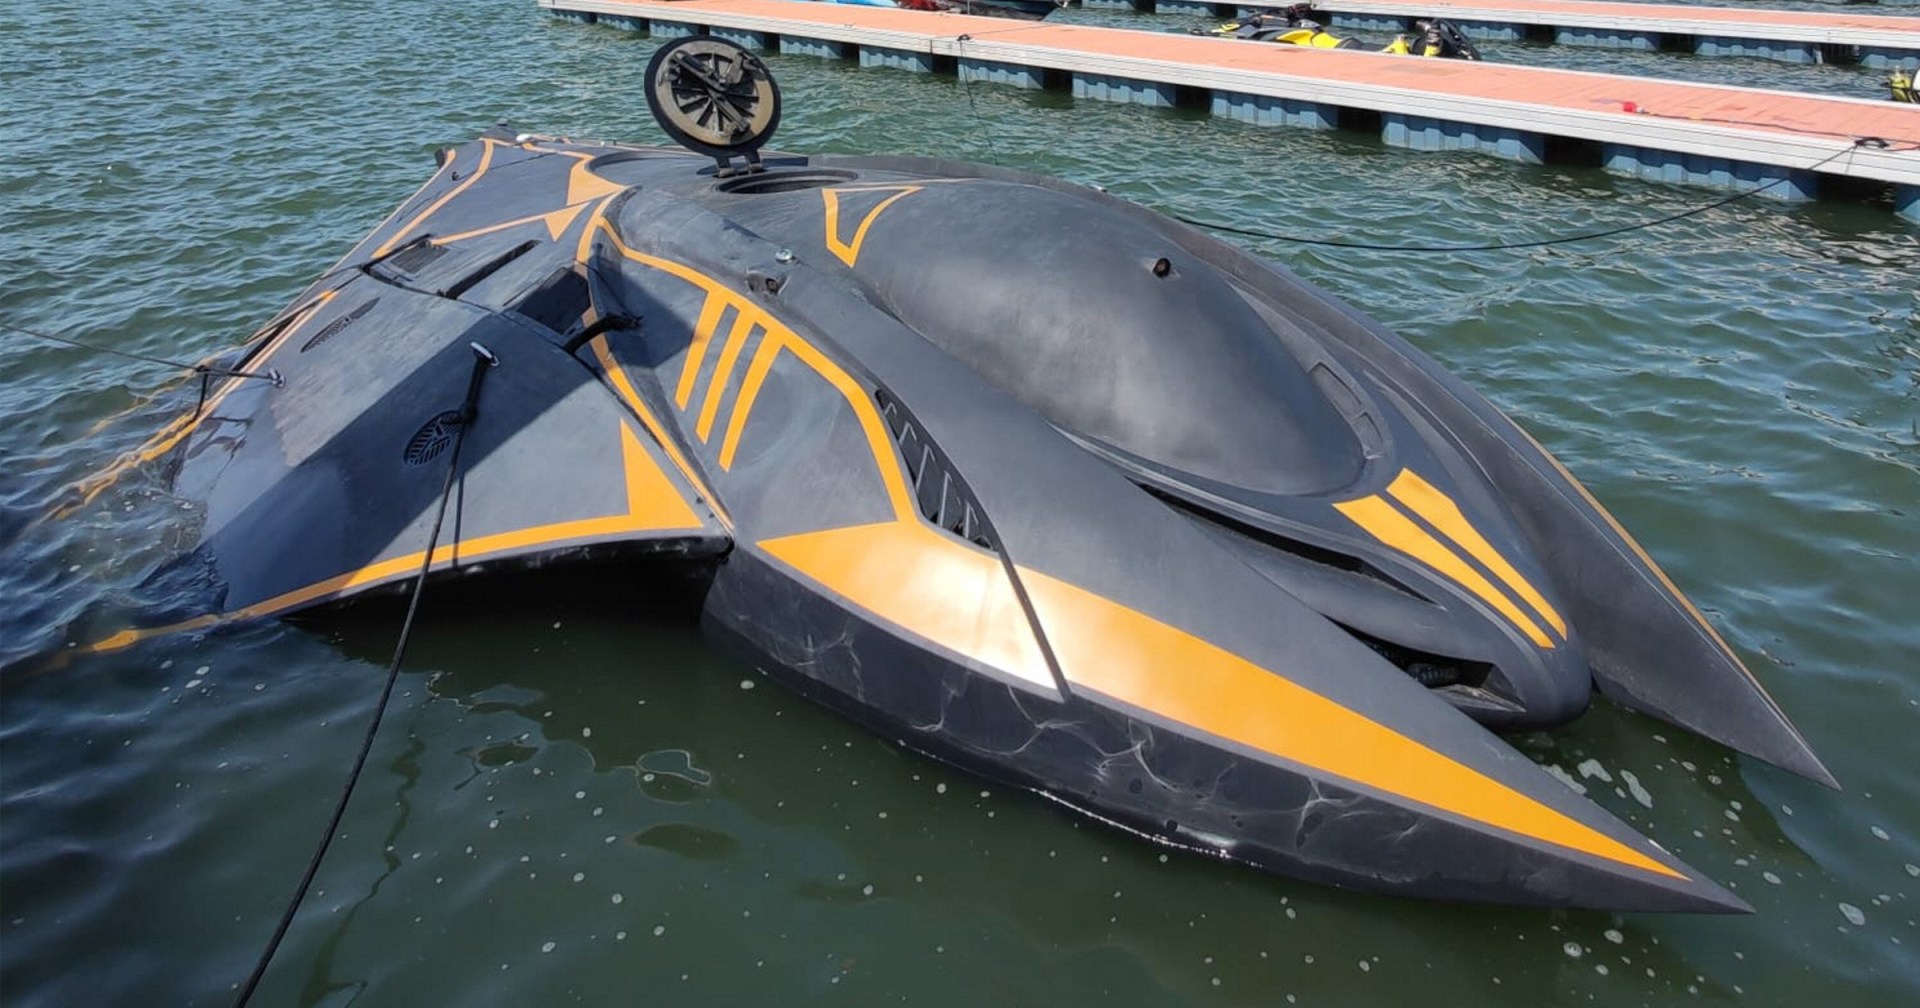 ukraine's new attack submarine is like something out of batman